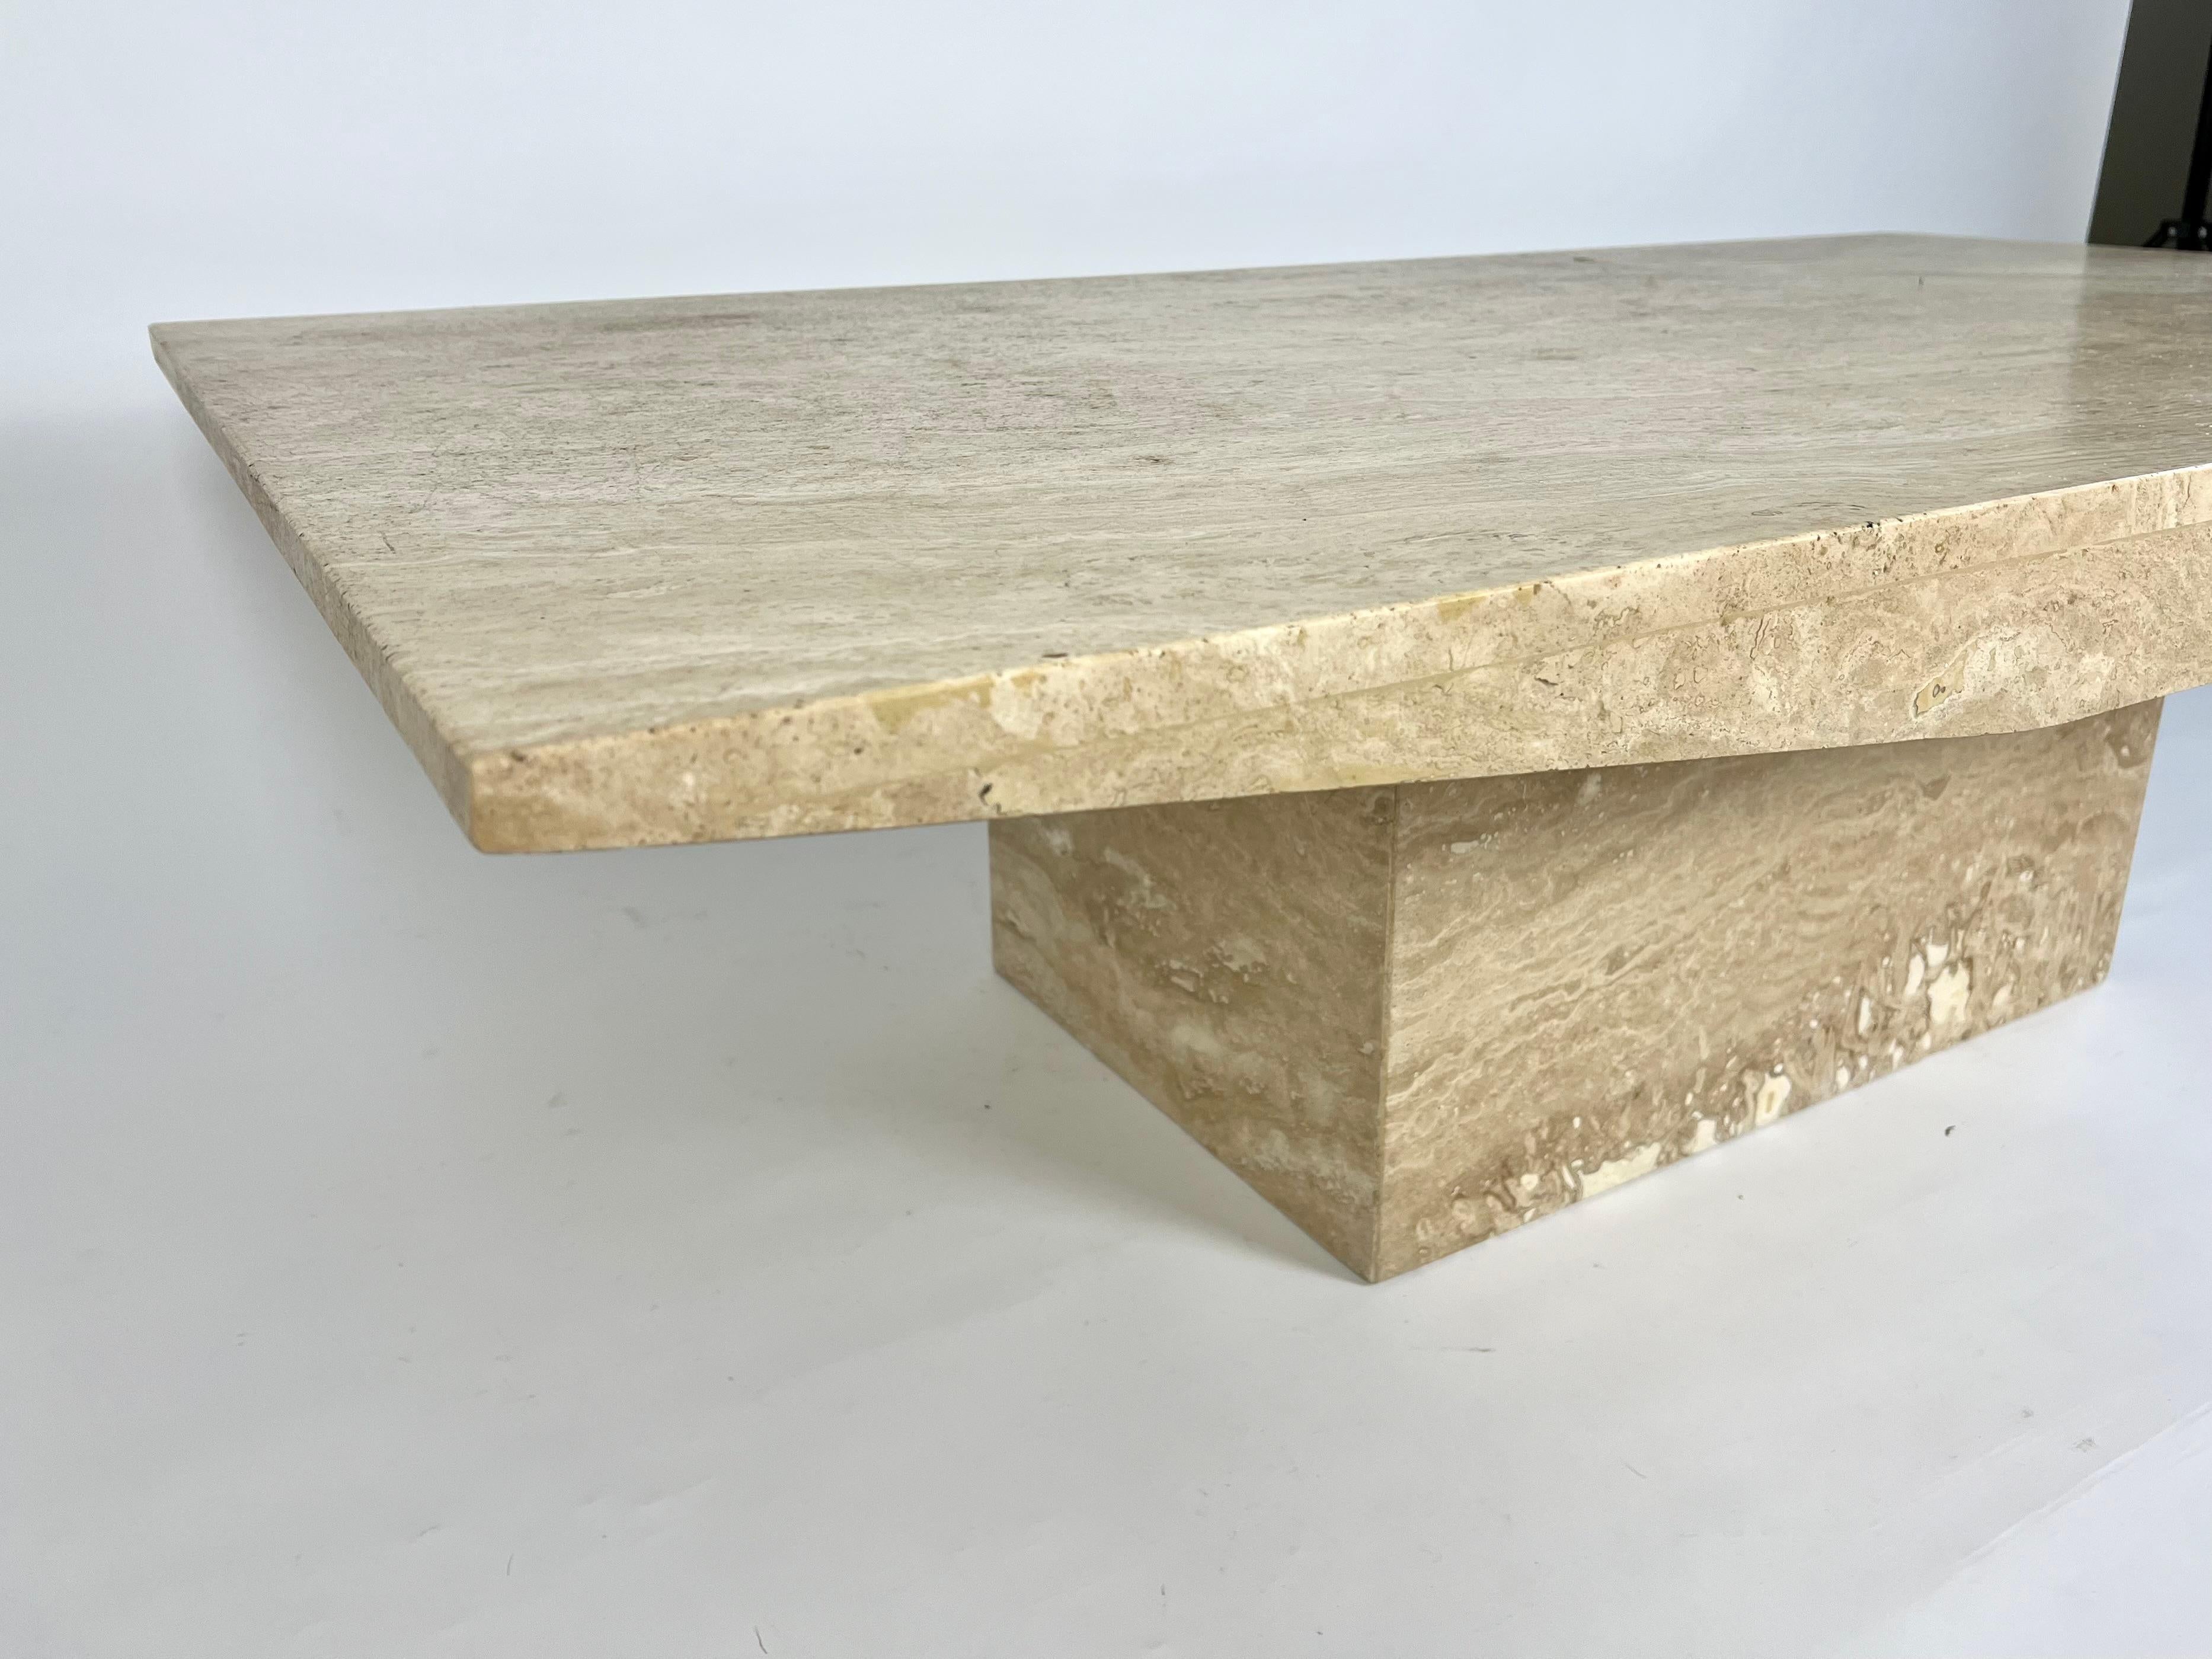 Large travertine stone coffee table, nice simplistic design

Natural, mid tone semi matt finish.

Excellent condition, no chips, cracks or stains. 

Top and base separate pieces. Very heavy!

For UK mainland delivery by courier, please message for a